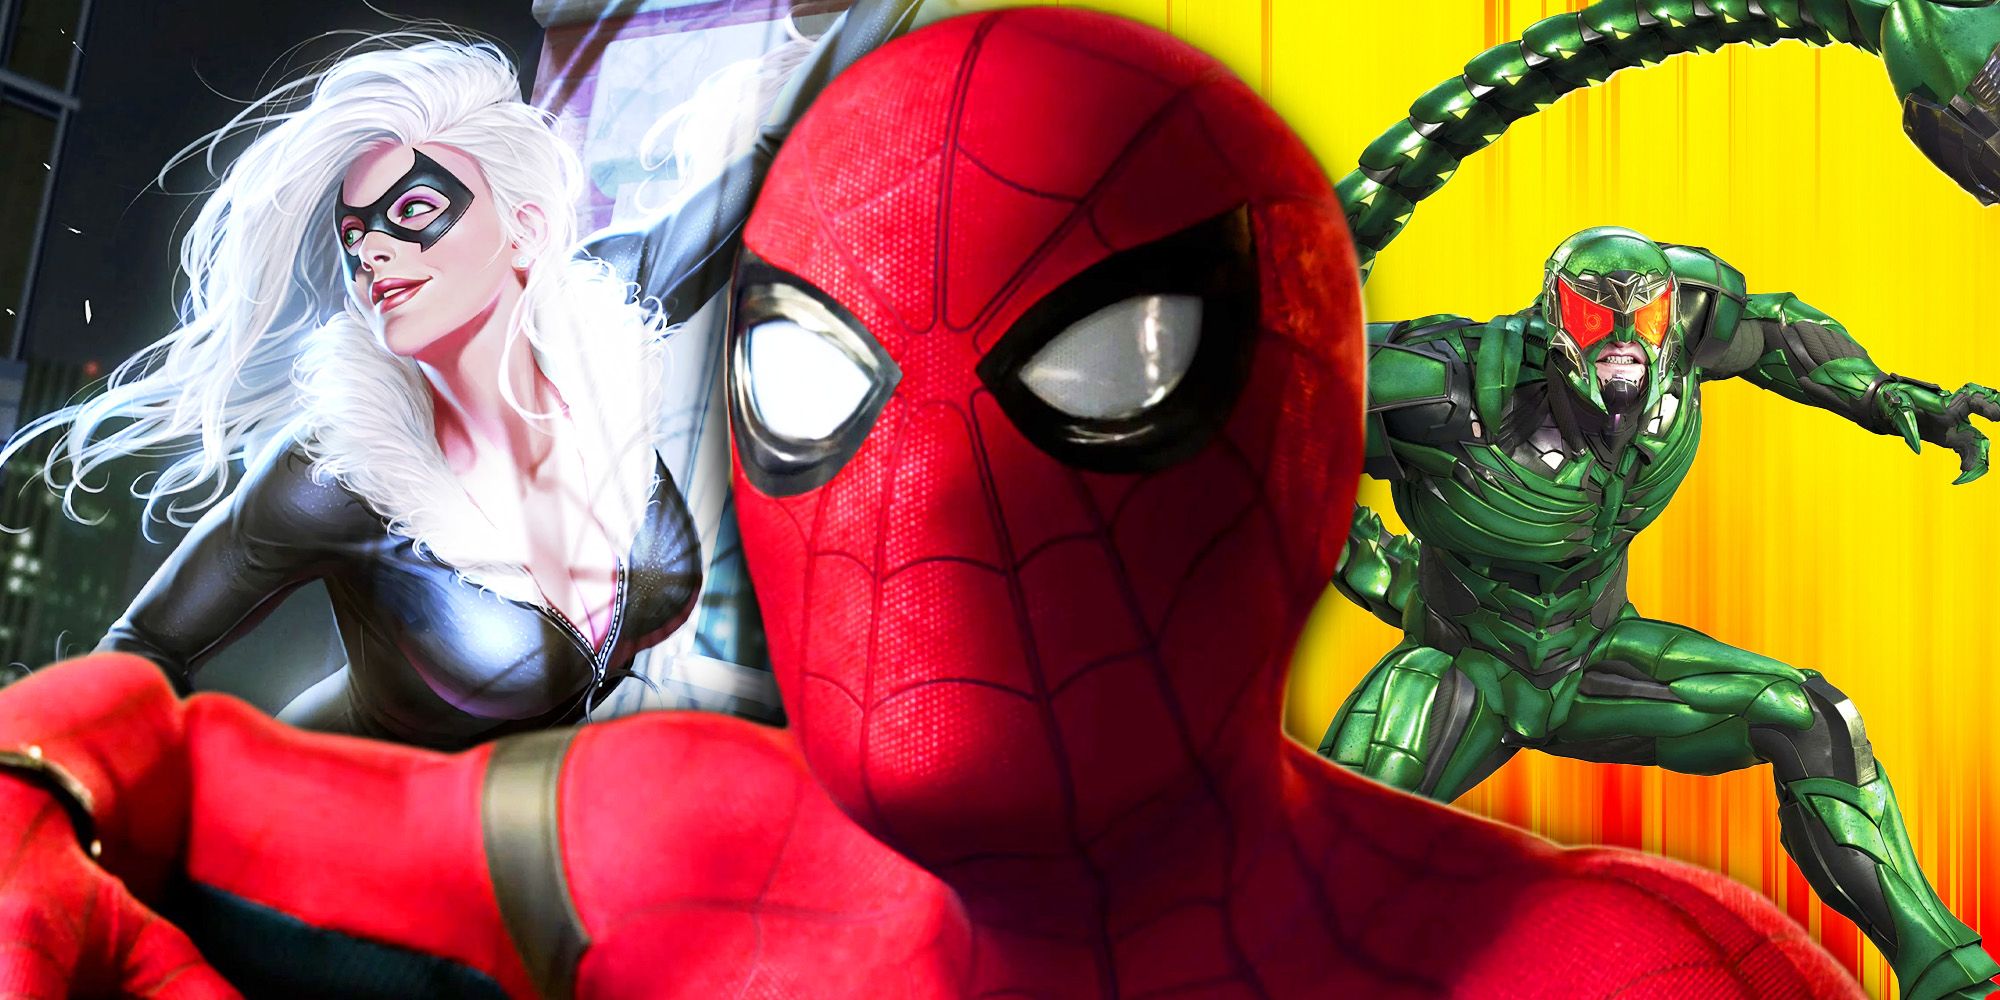 Tom Holland's Spider-Man in the MCU with Black Cat and Scorpion in Marvel Comics